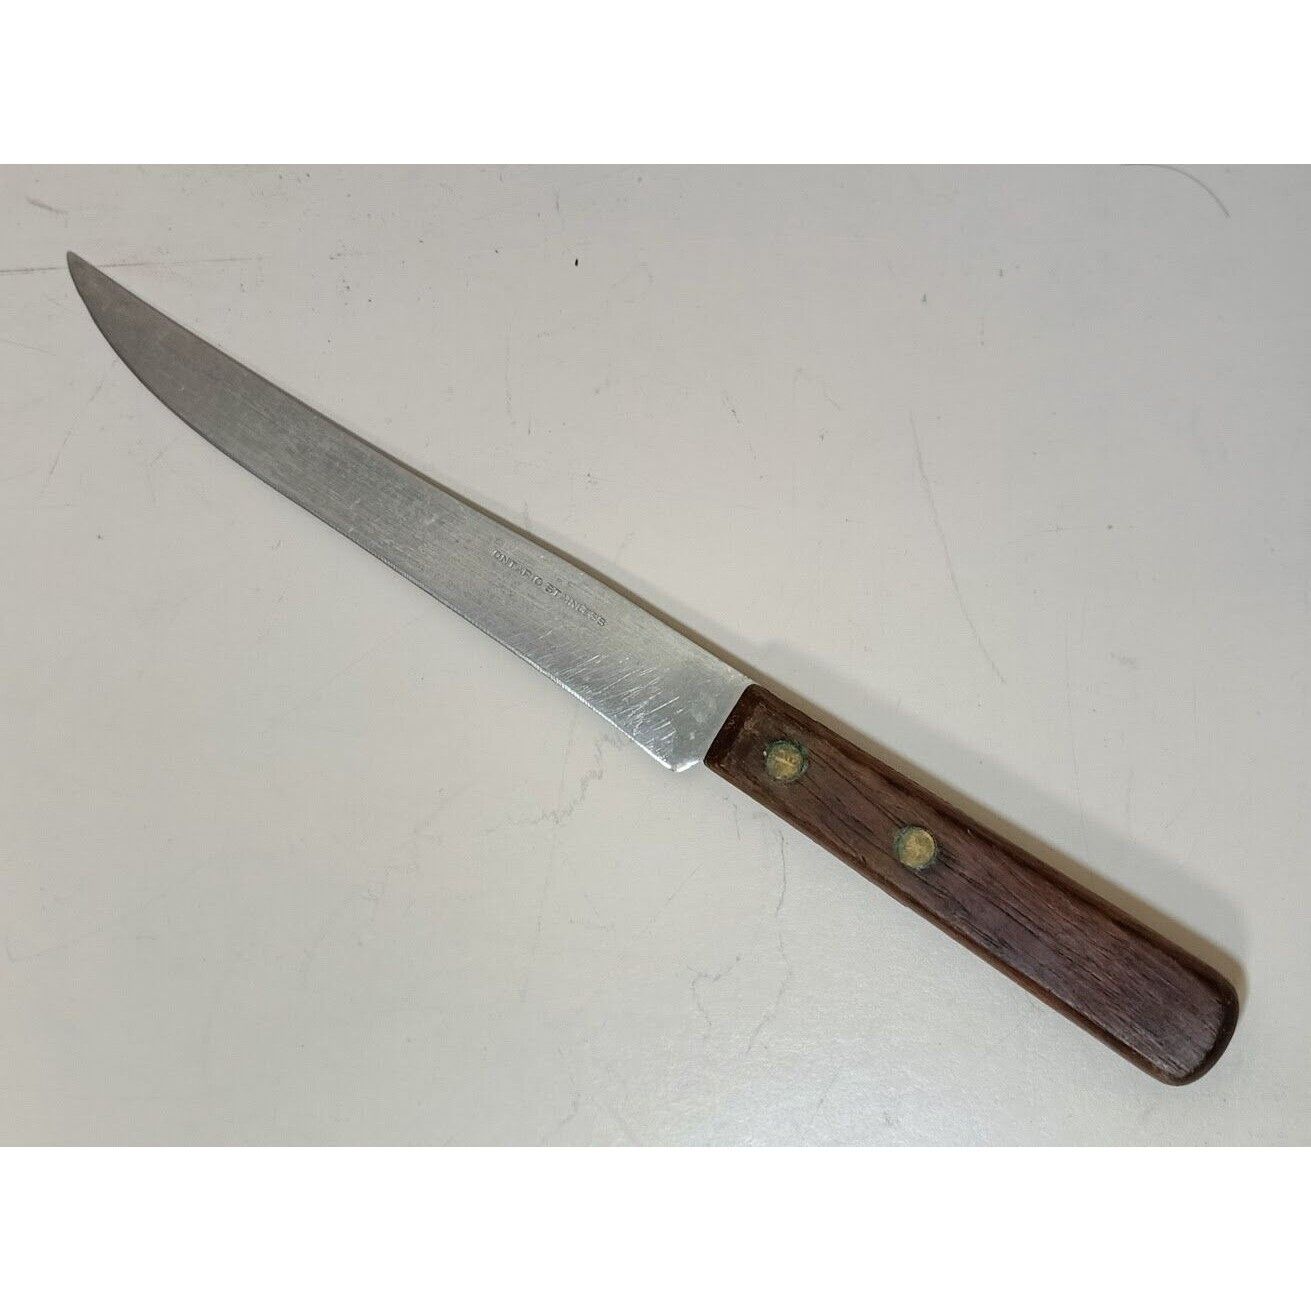 Vintage Ontario Stainless Steel Kitchen Knife with Wooden Handle Durable & Sharp